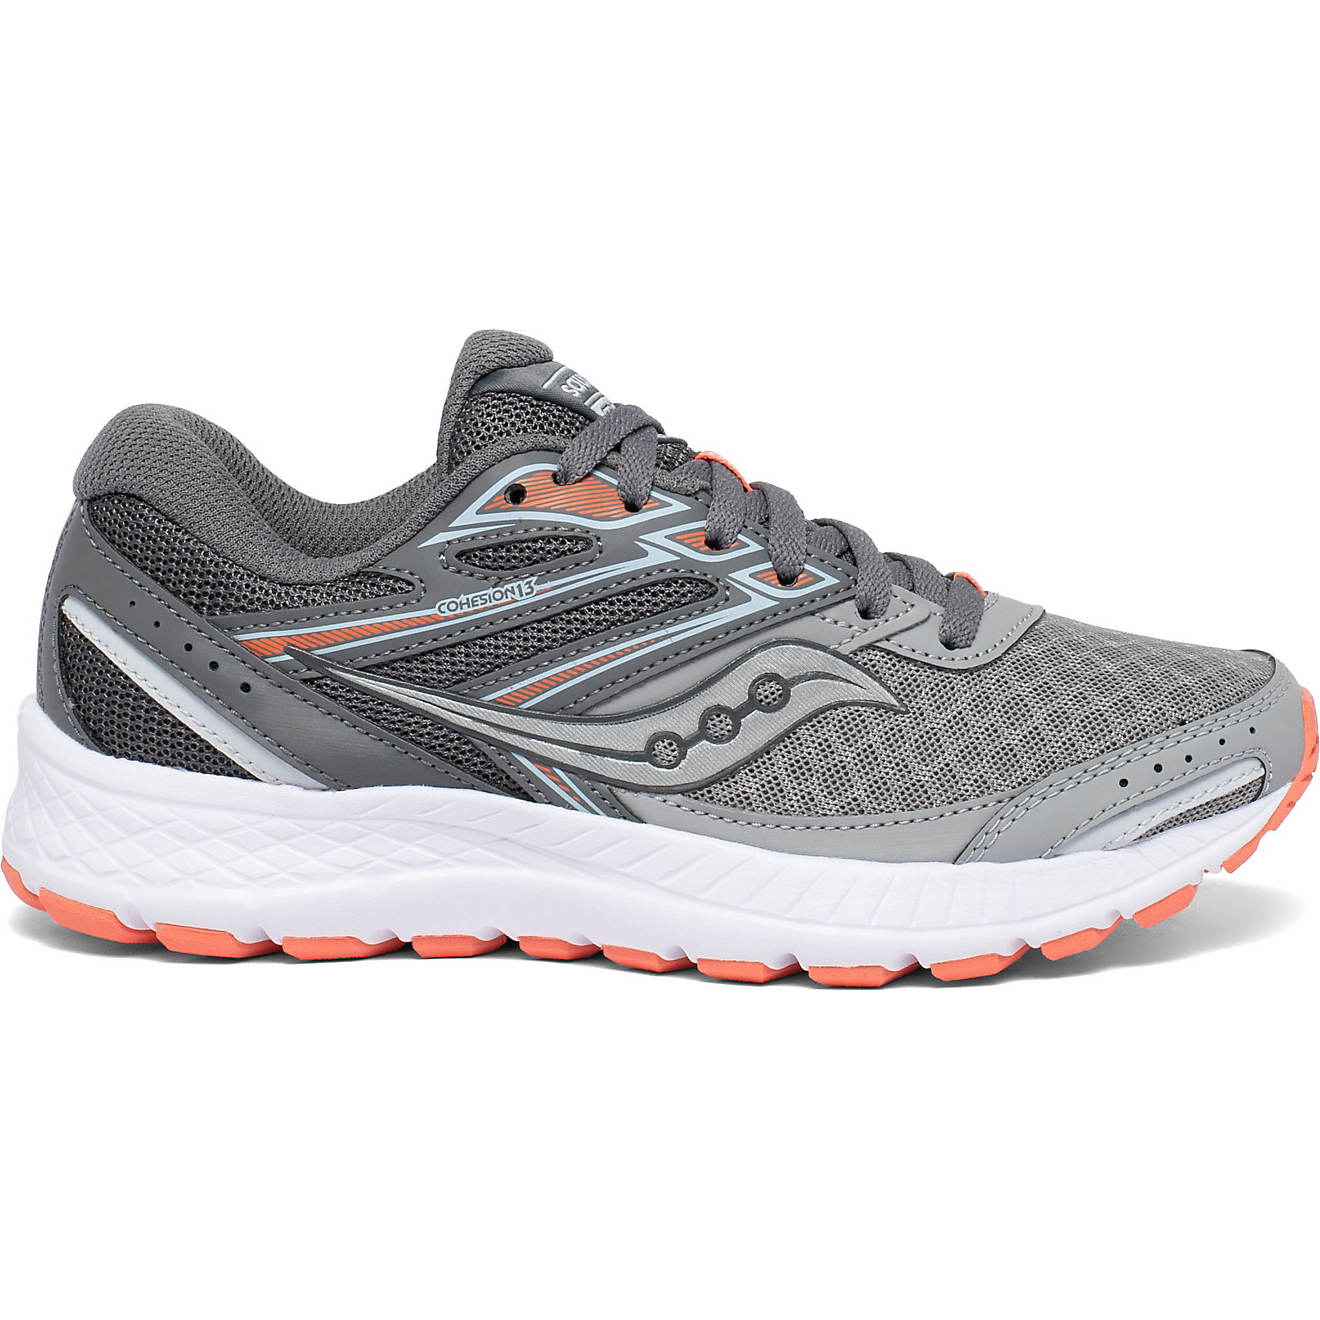 Saucony Women's Cohesion 13 Running Shoes on Sale At Academy Sports + Outdoors